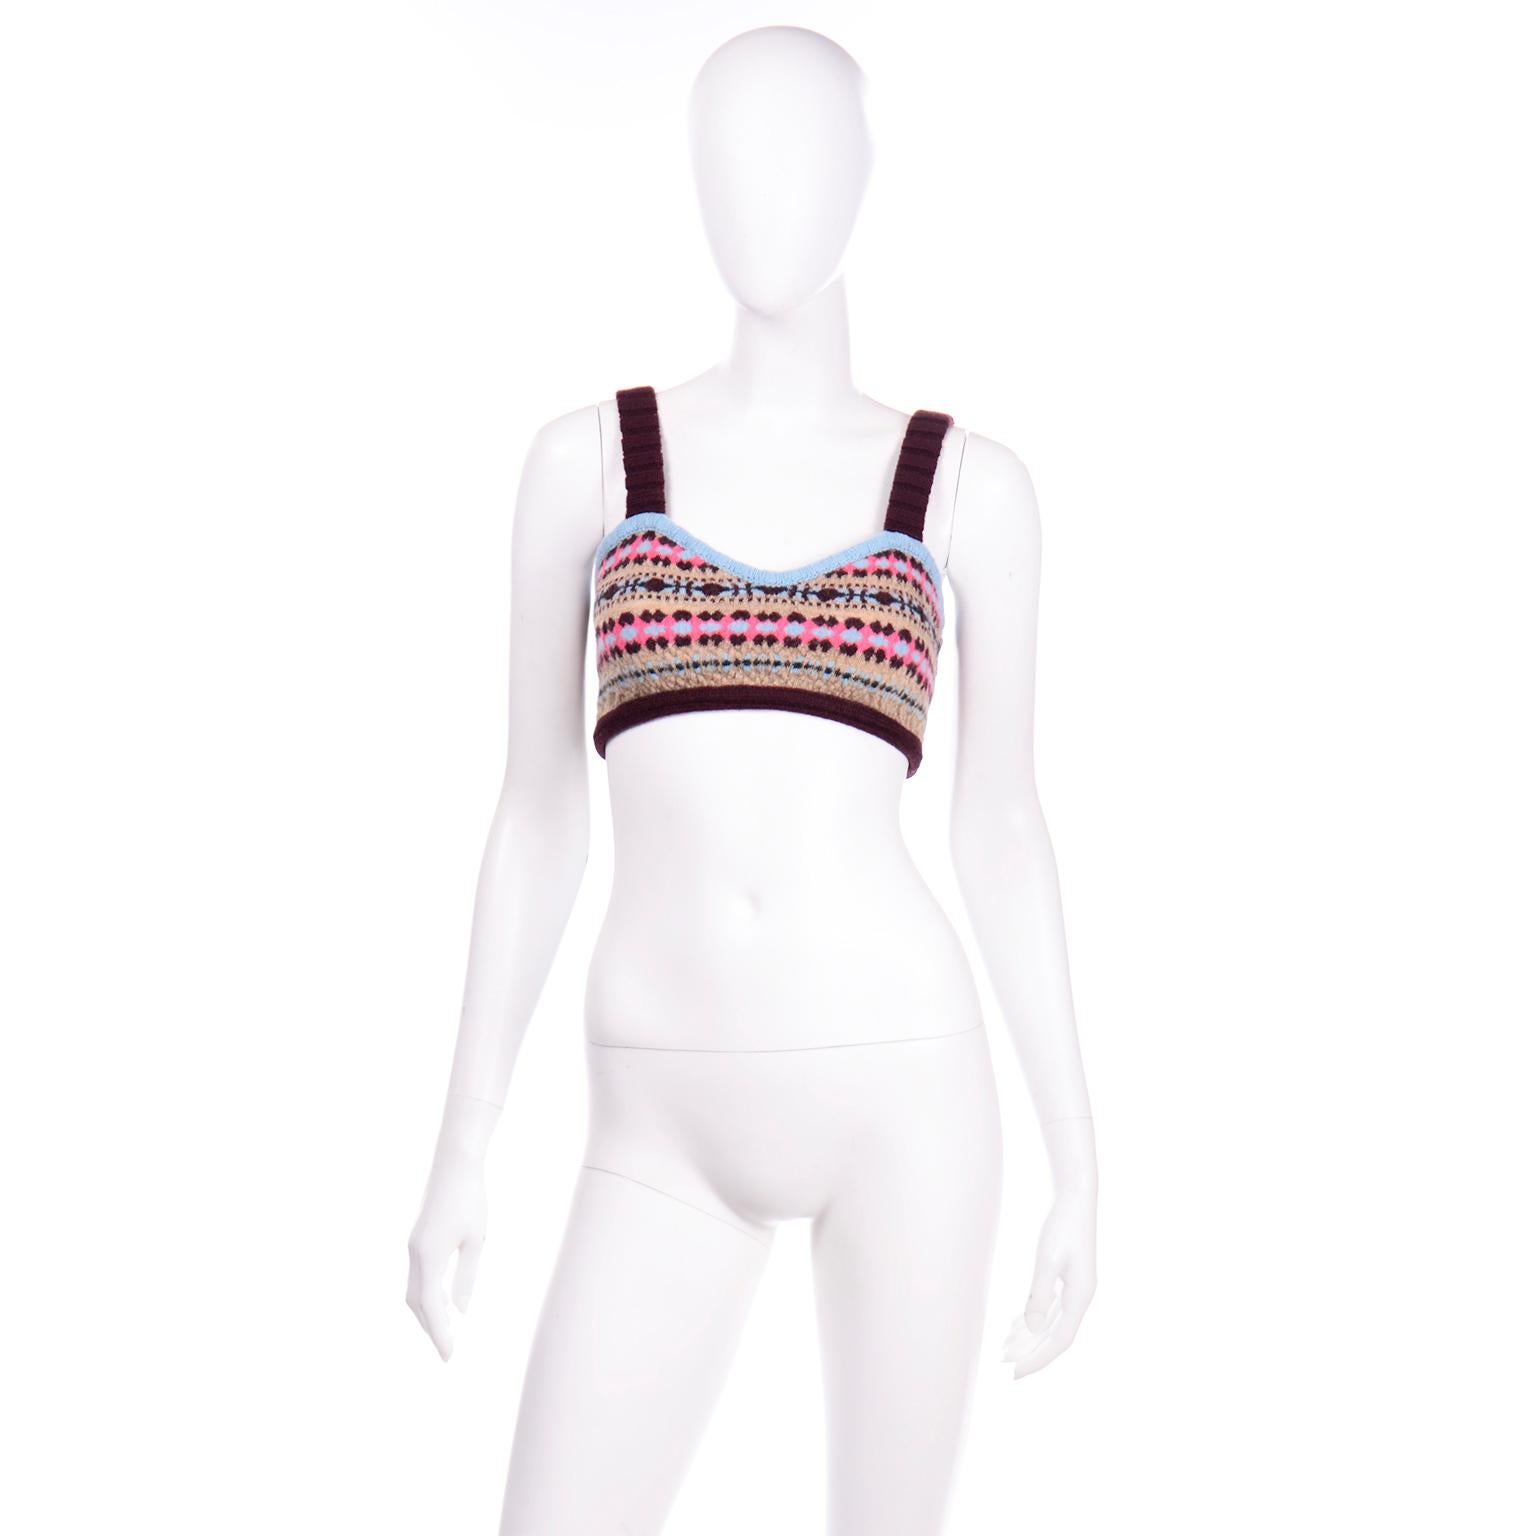 This is such a versatile multi-colored wool fair isle knit bralette style top by Valentino. This deadstock top has original tags attached and the pattern is in pretty shades of sky blue, burgundy, salmon pink, tan, and brown. The top of the bust is